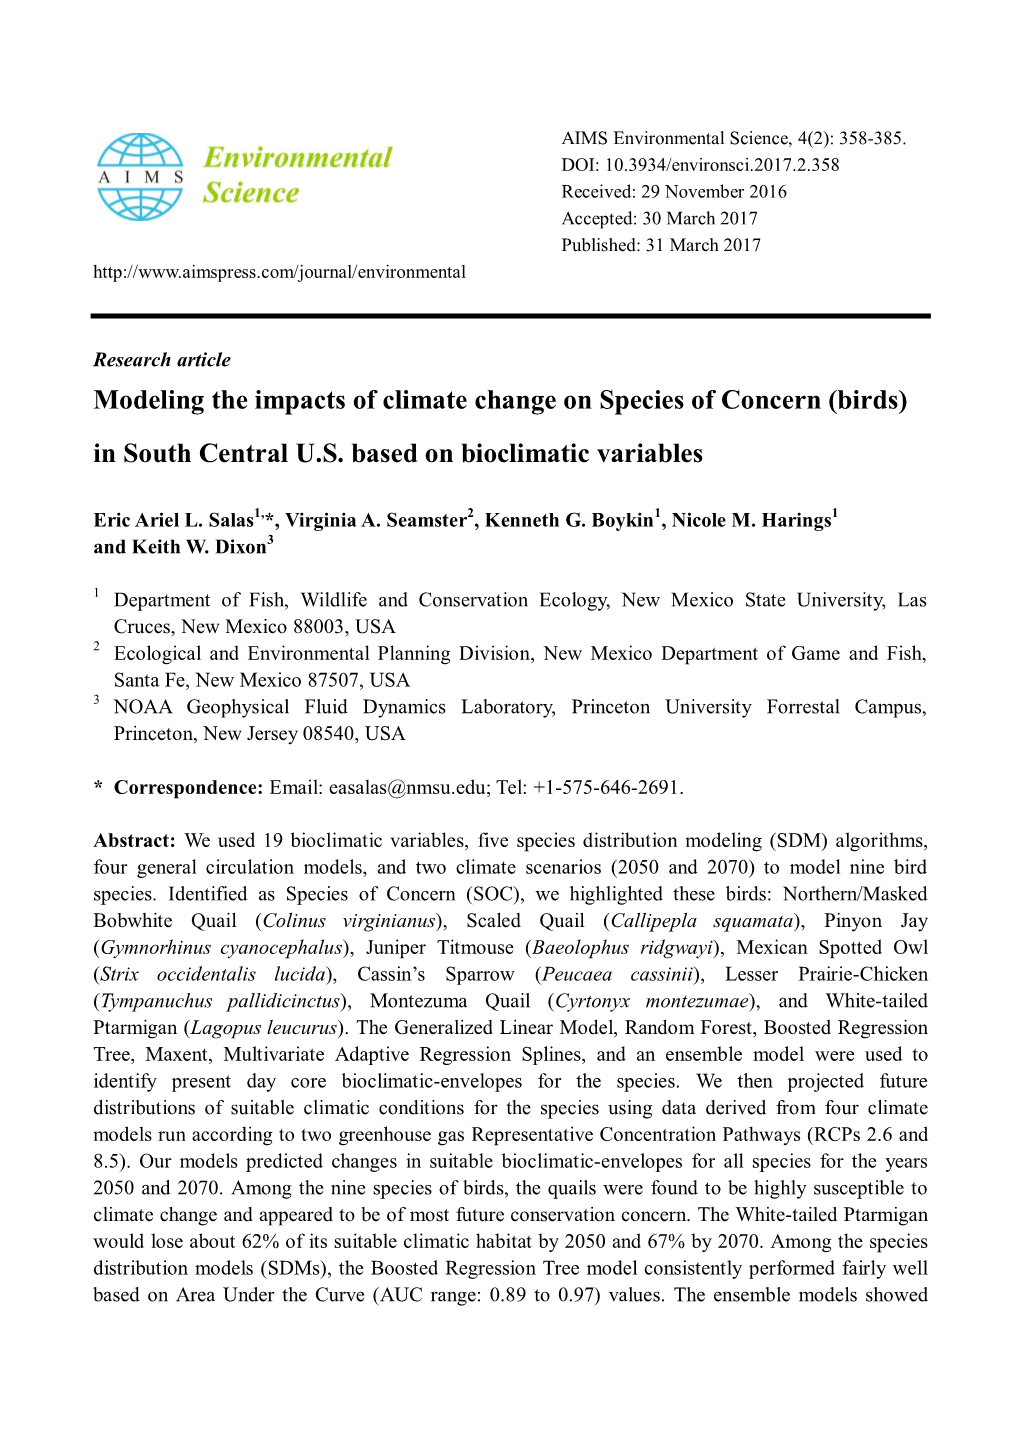 Modeling the Impacts of Climate Change on Species of Concern (Birds) in South Central U.S